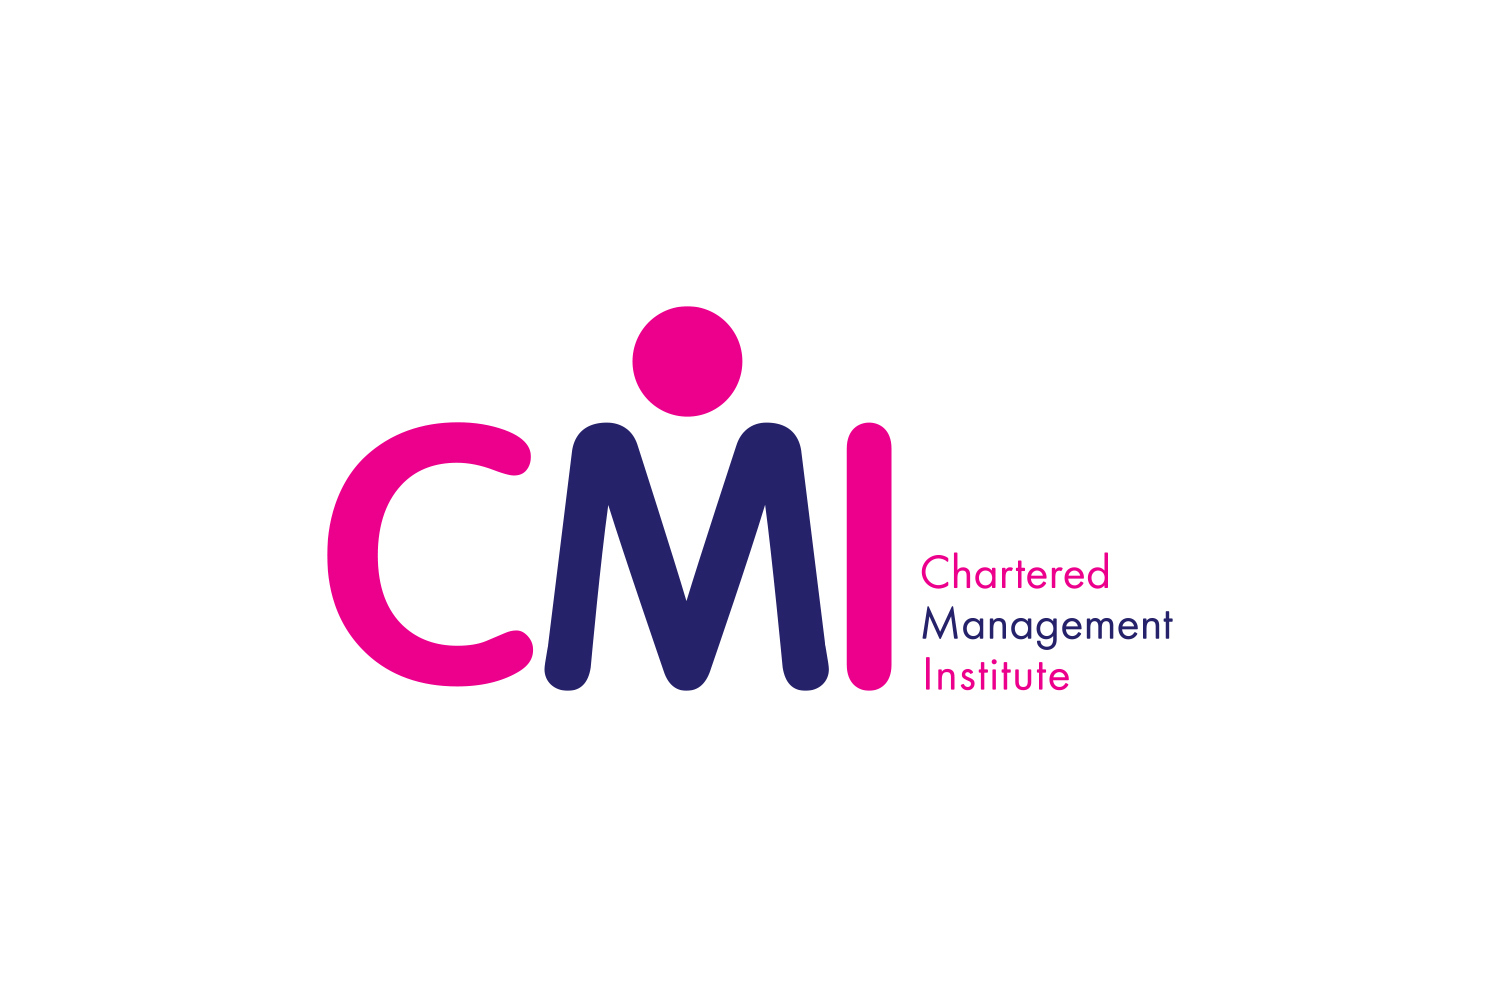 Chartered Management Institute